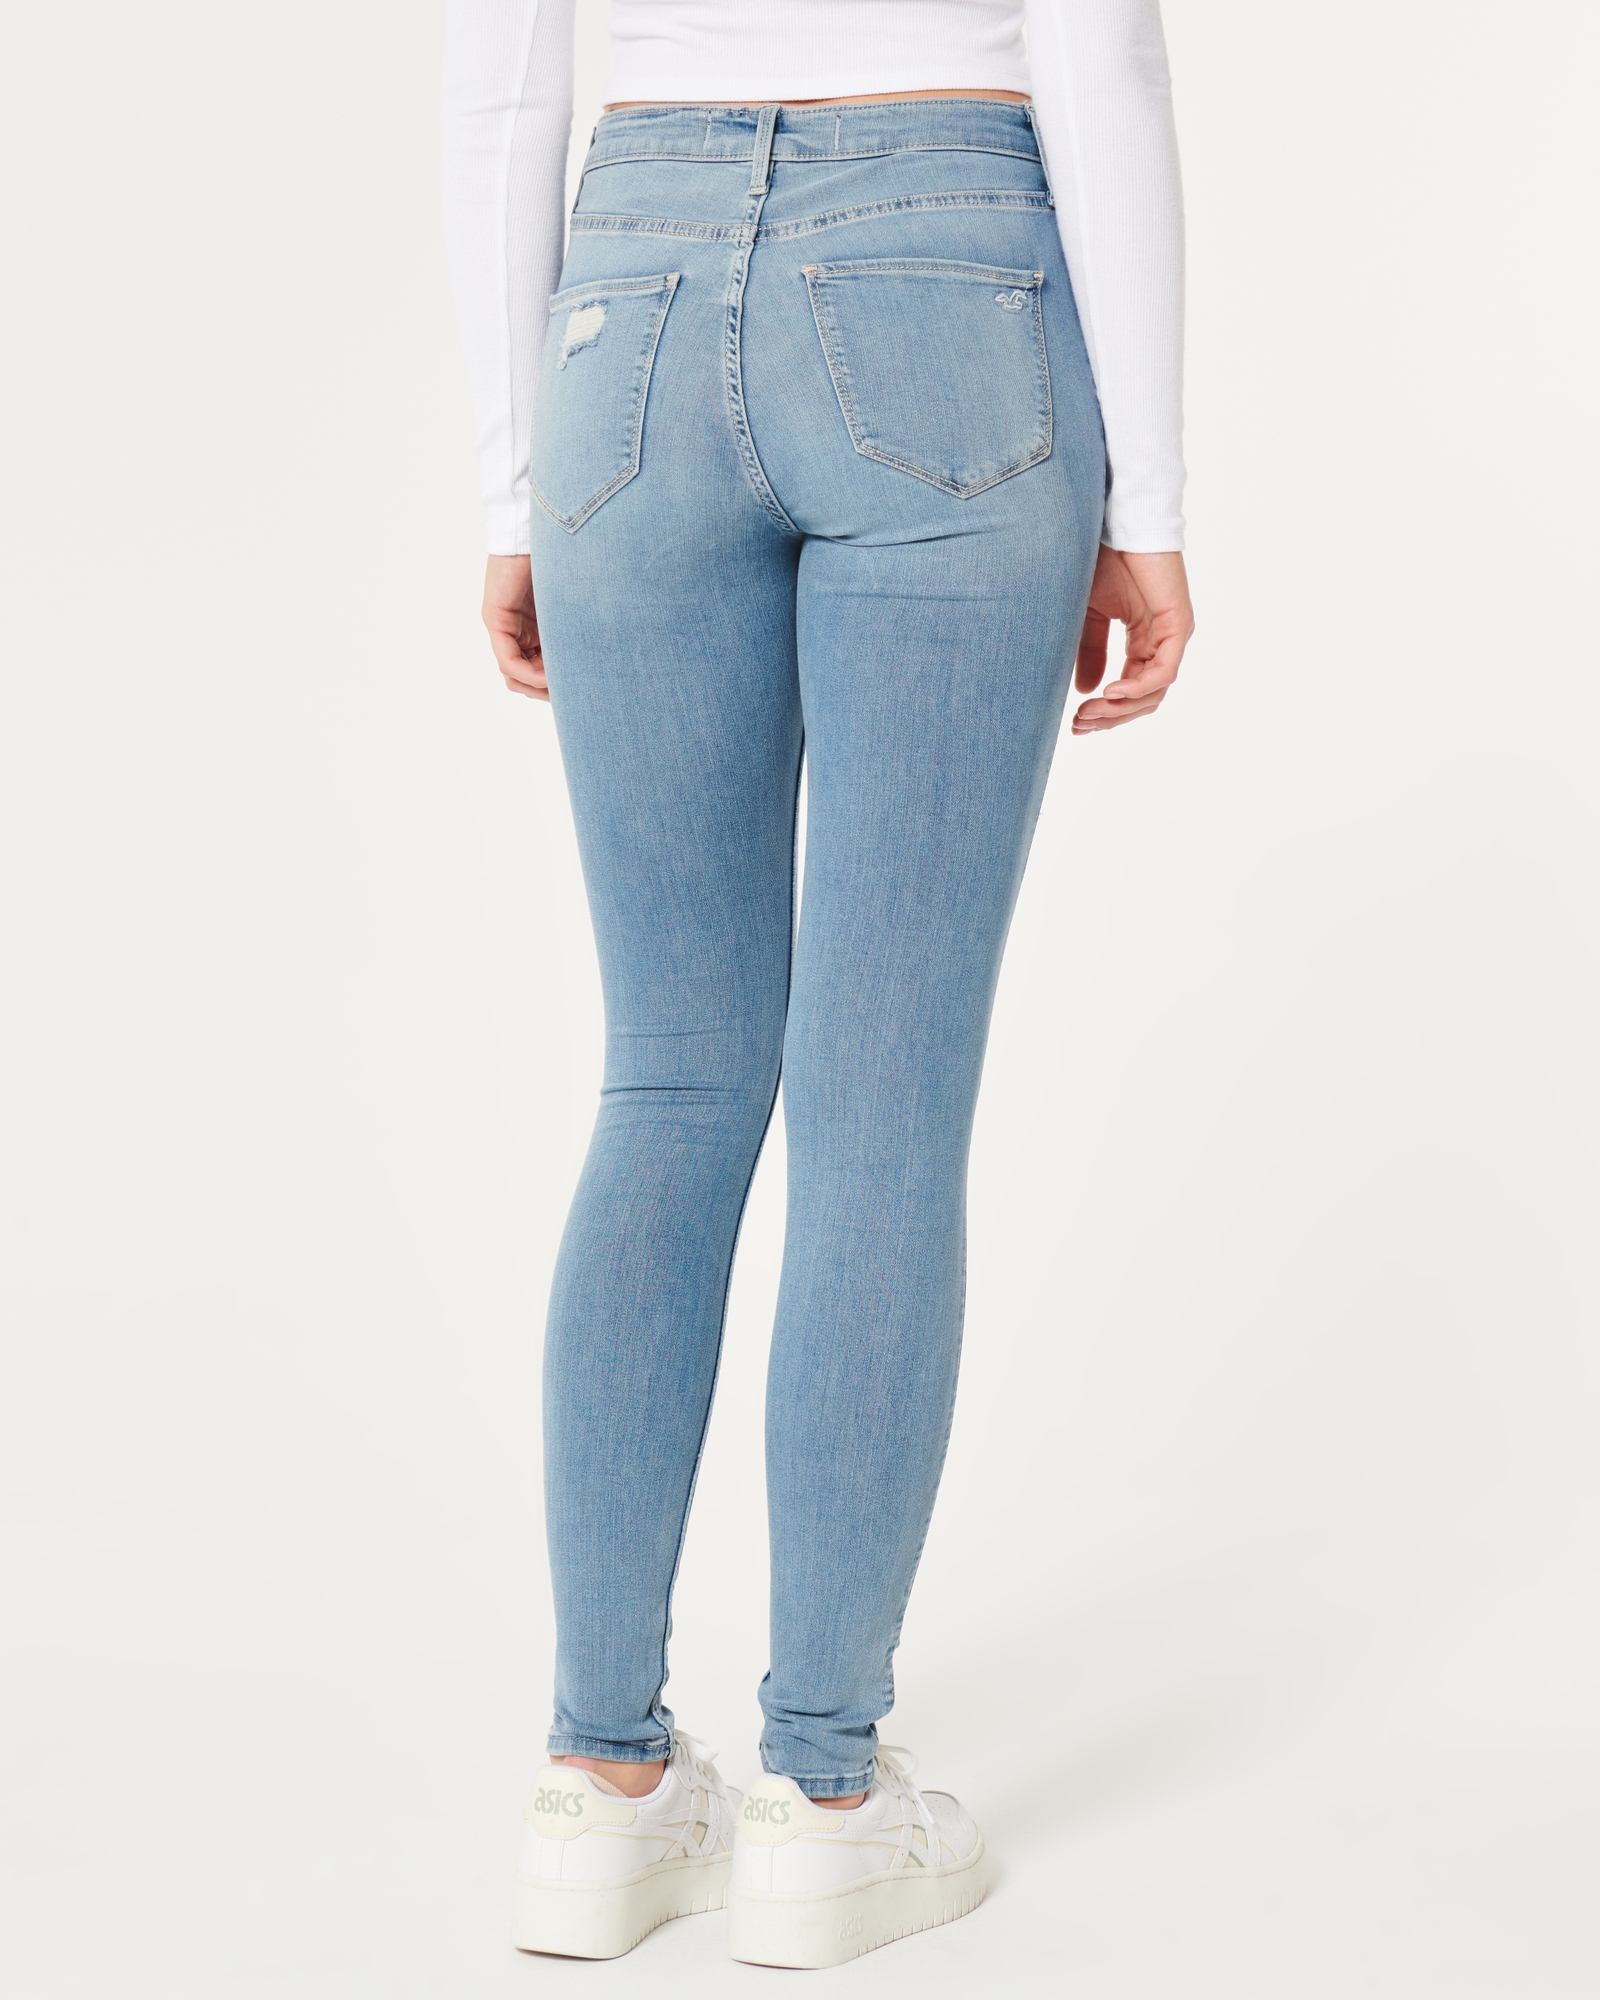 Hollister Jeggings High Rise Blue Size 24 - $7 (85% Off Retail) - From Laura